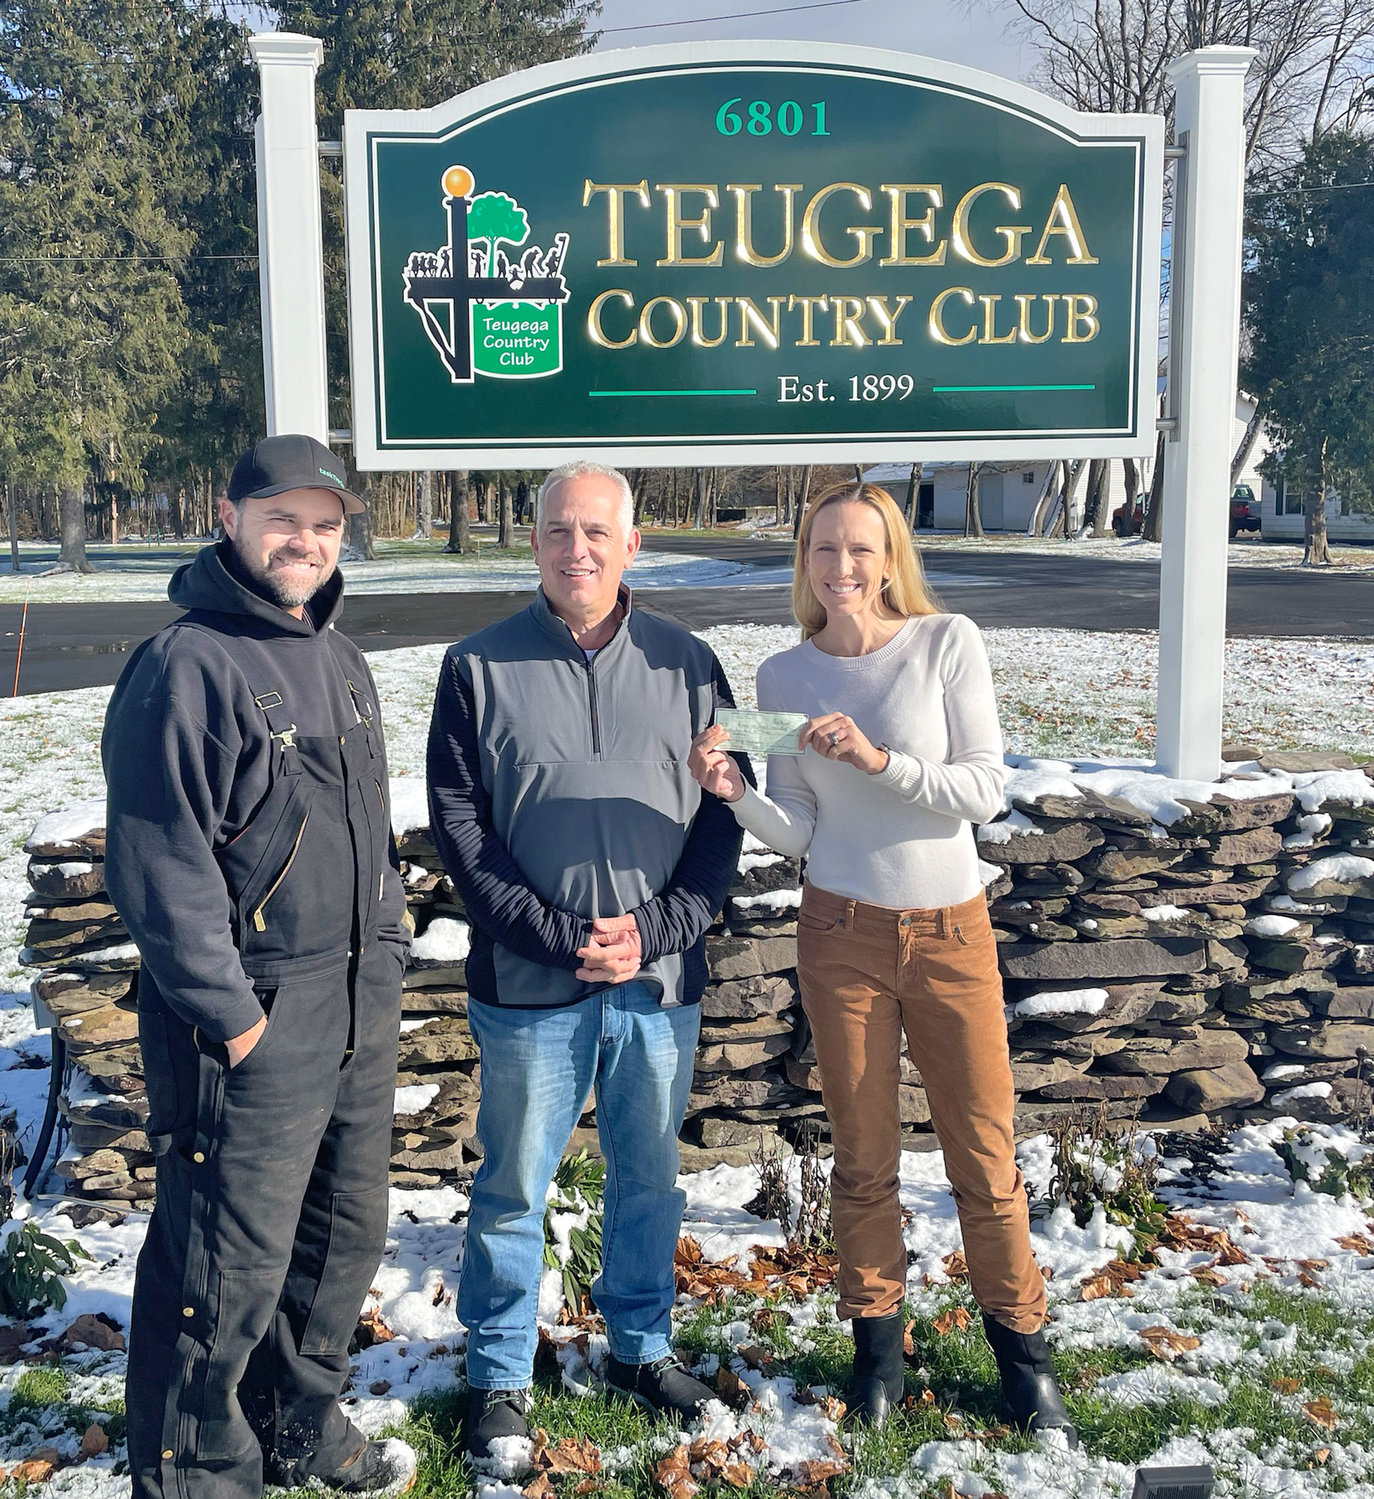 DONATION MADE — The New York State Speedgolf Open in conjunction with Speedgolf USA donated $500 in the name of Seve Campanaro to the American Heart Association on Tuesday. Seve’s father, Steve, is the head golf professional at Teugega Country Club. Pictured from left: Teugega Superintendent Ian Daniels, Steve Campanaro, and Lauren Cupp. Cupp broke the women’s speedgolf world record at Teugega in August.